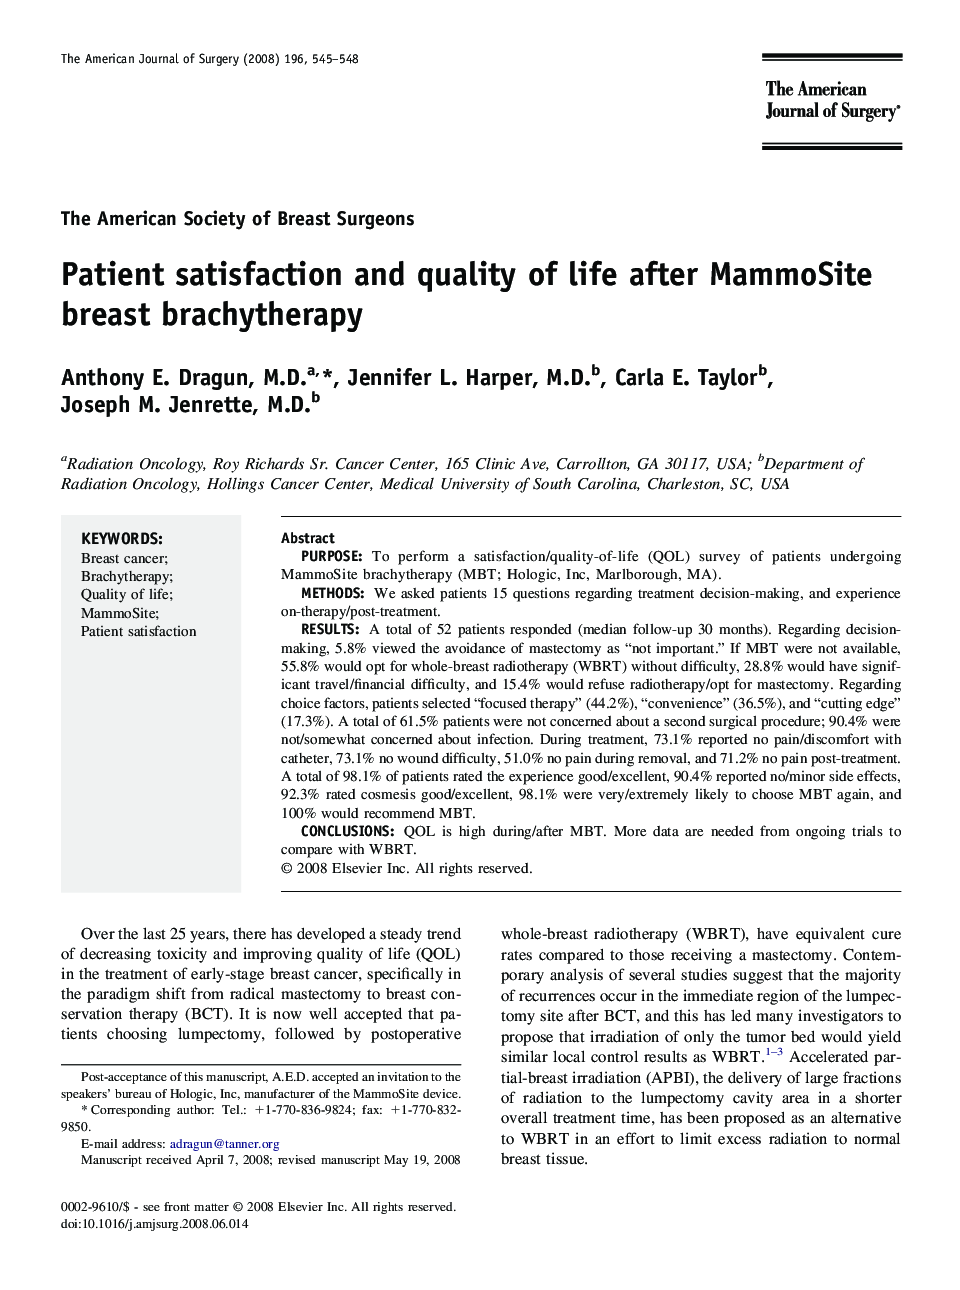 Patient satisfaction and quality of life after MammoSite breast brachytherapy 